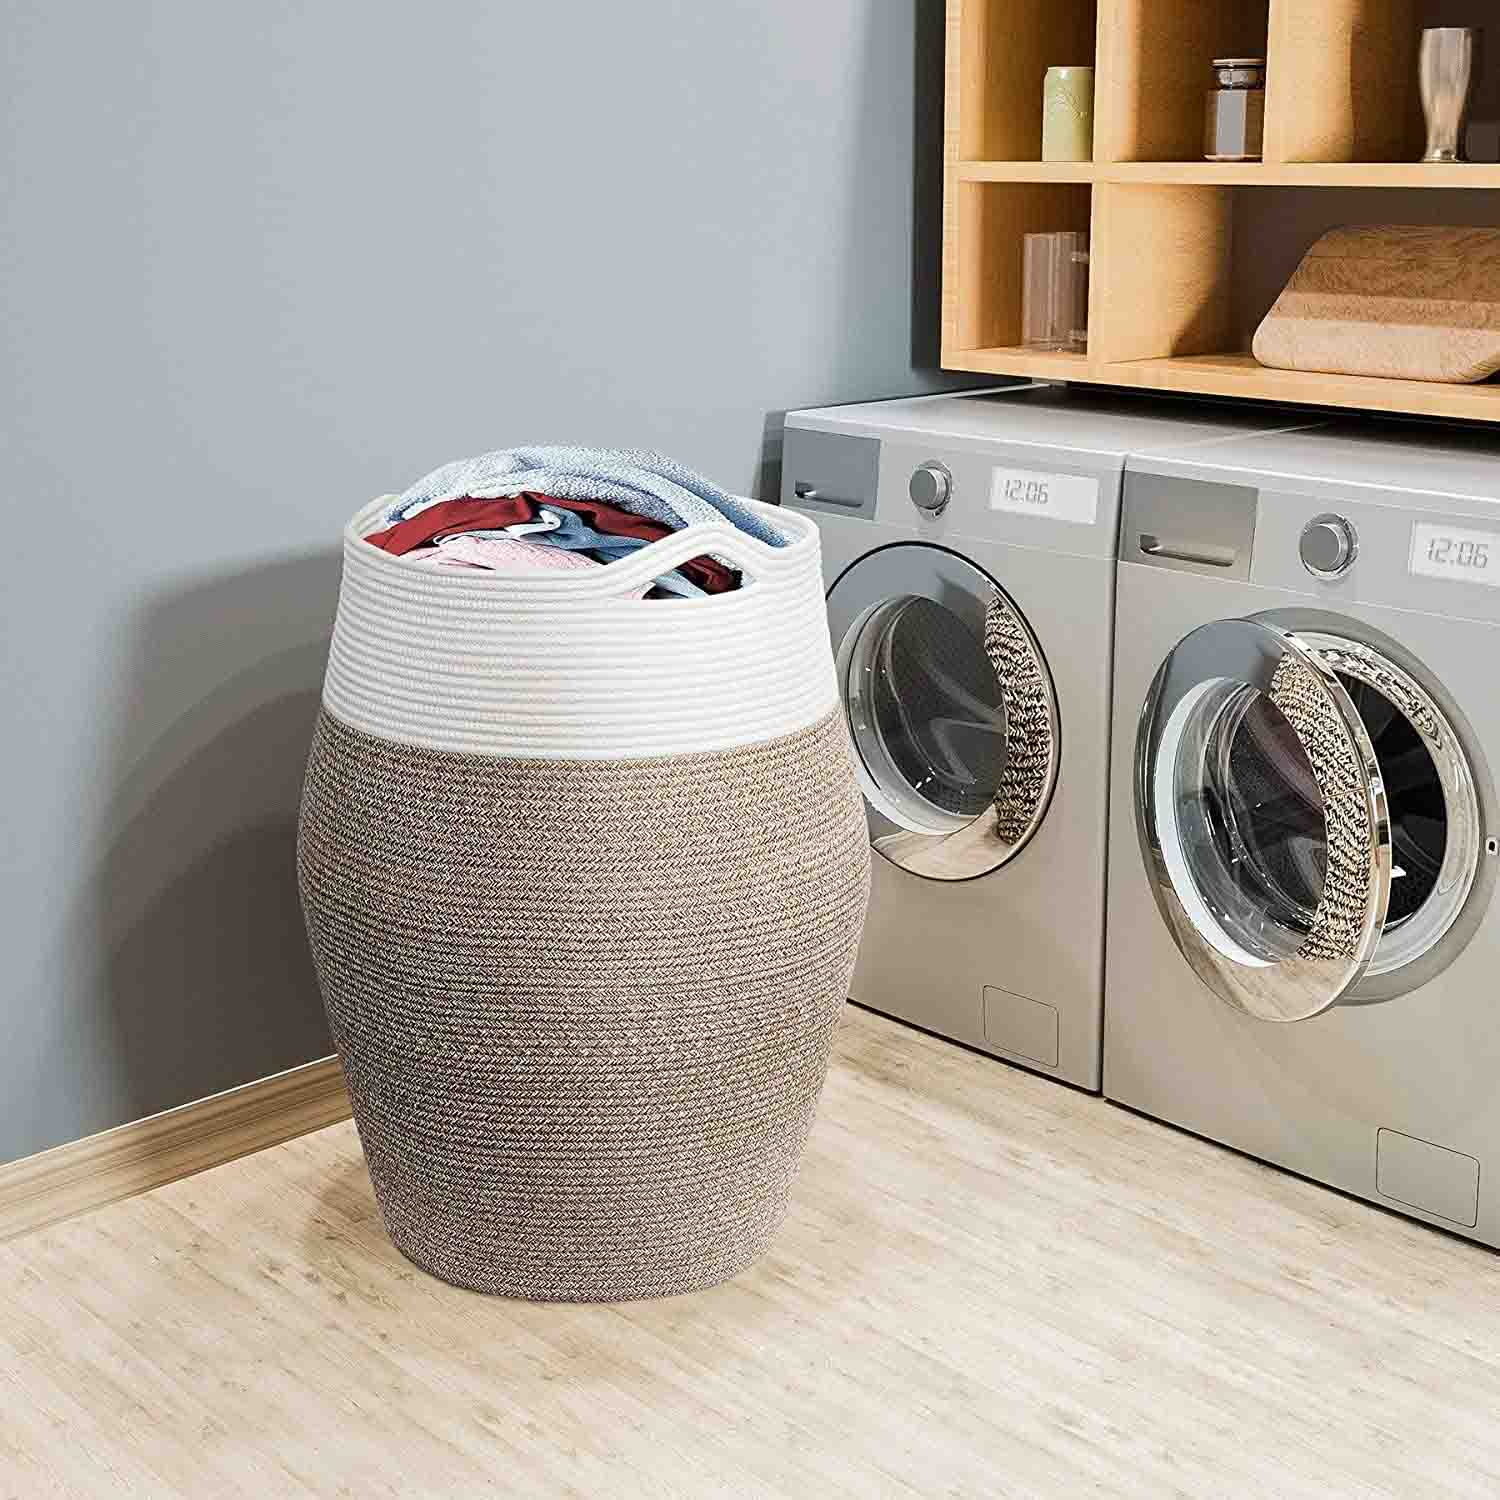 Brown Mix Woven Cotton Rope Laundry Hamper - NovoBam